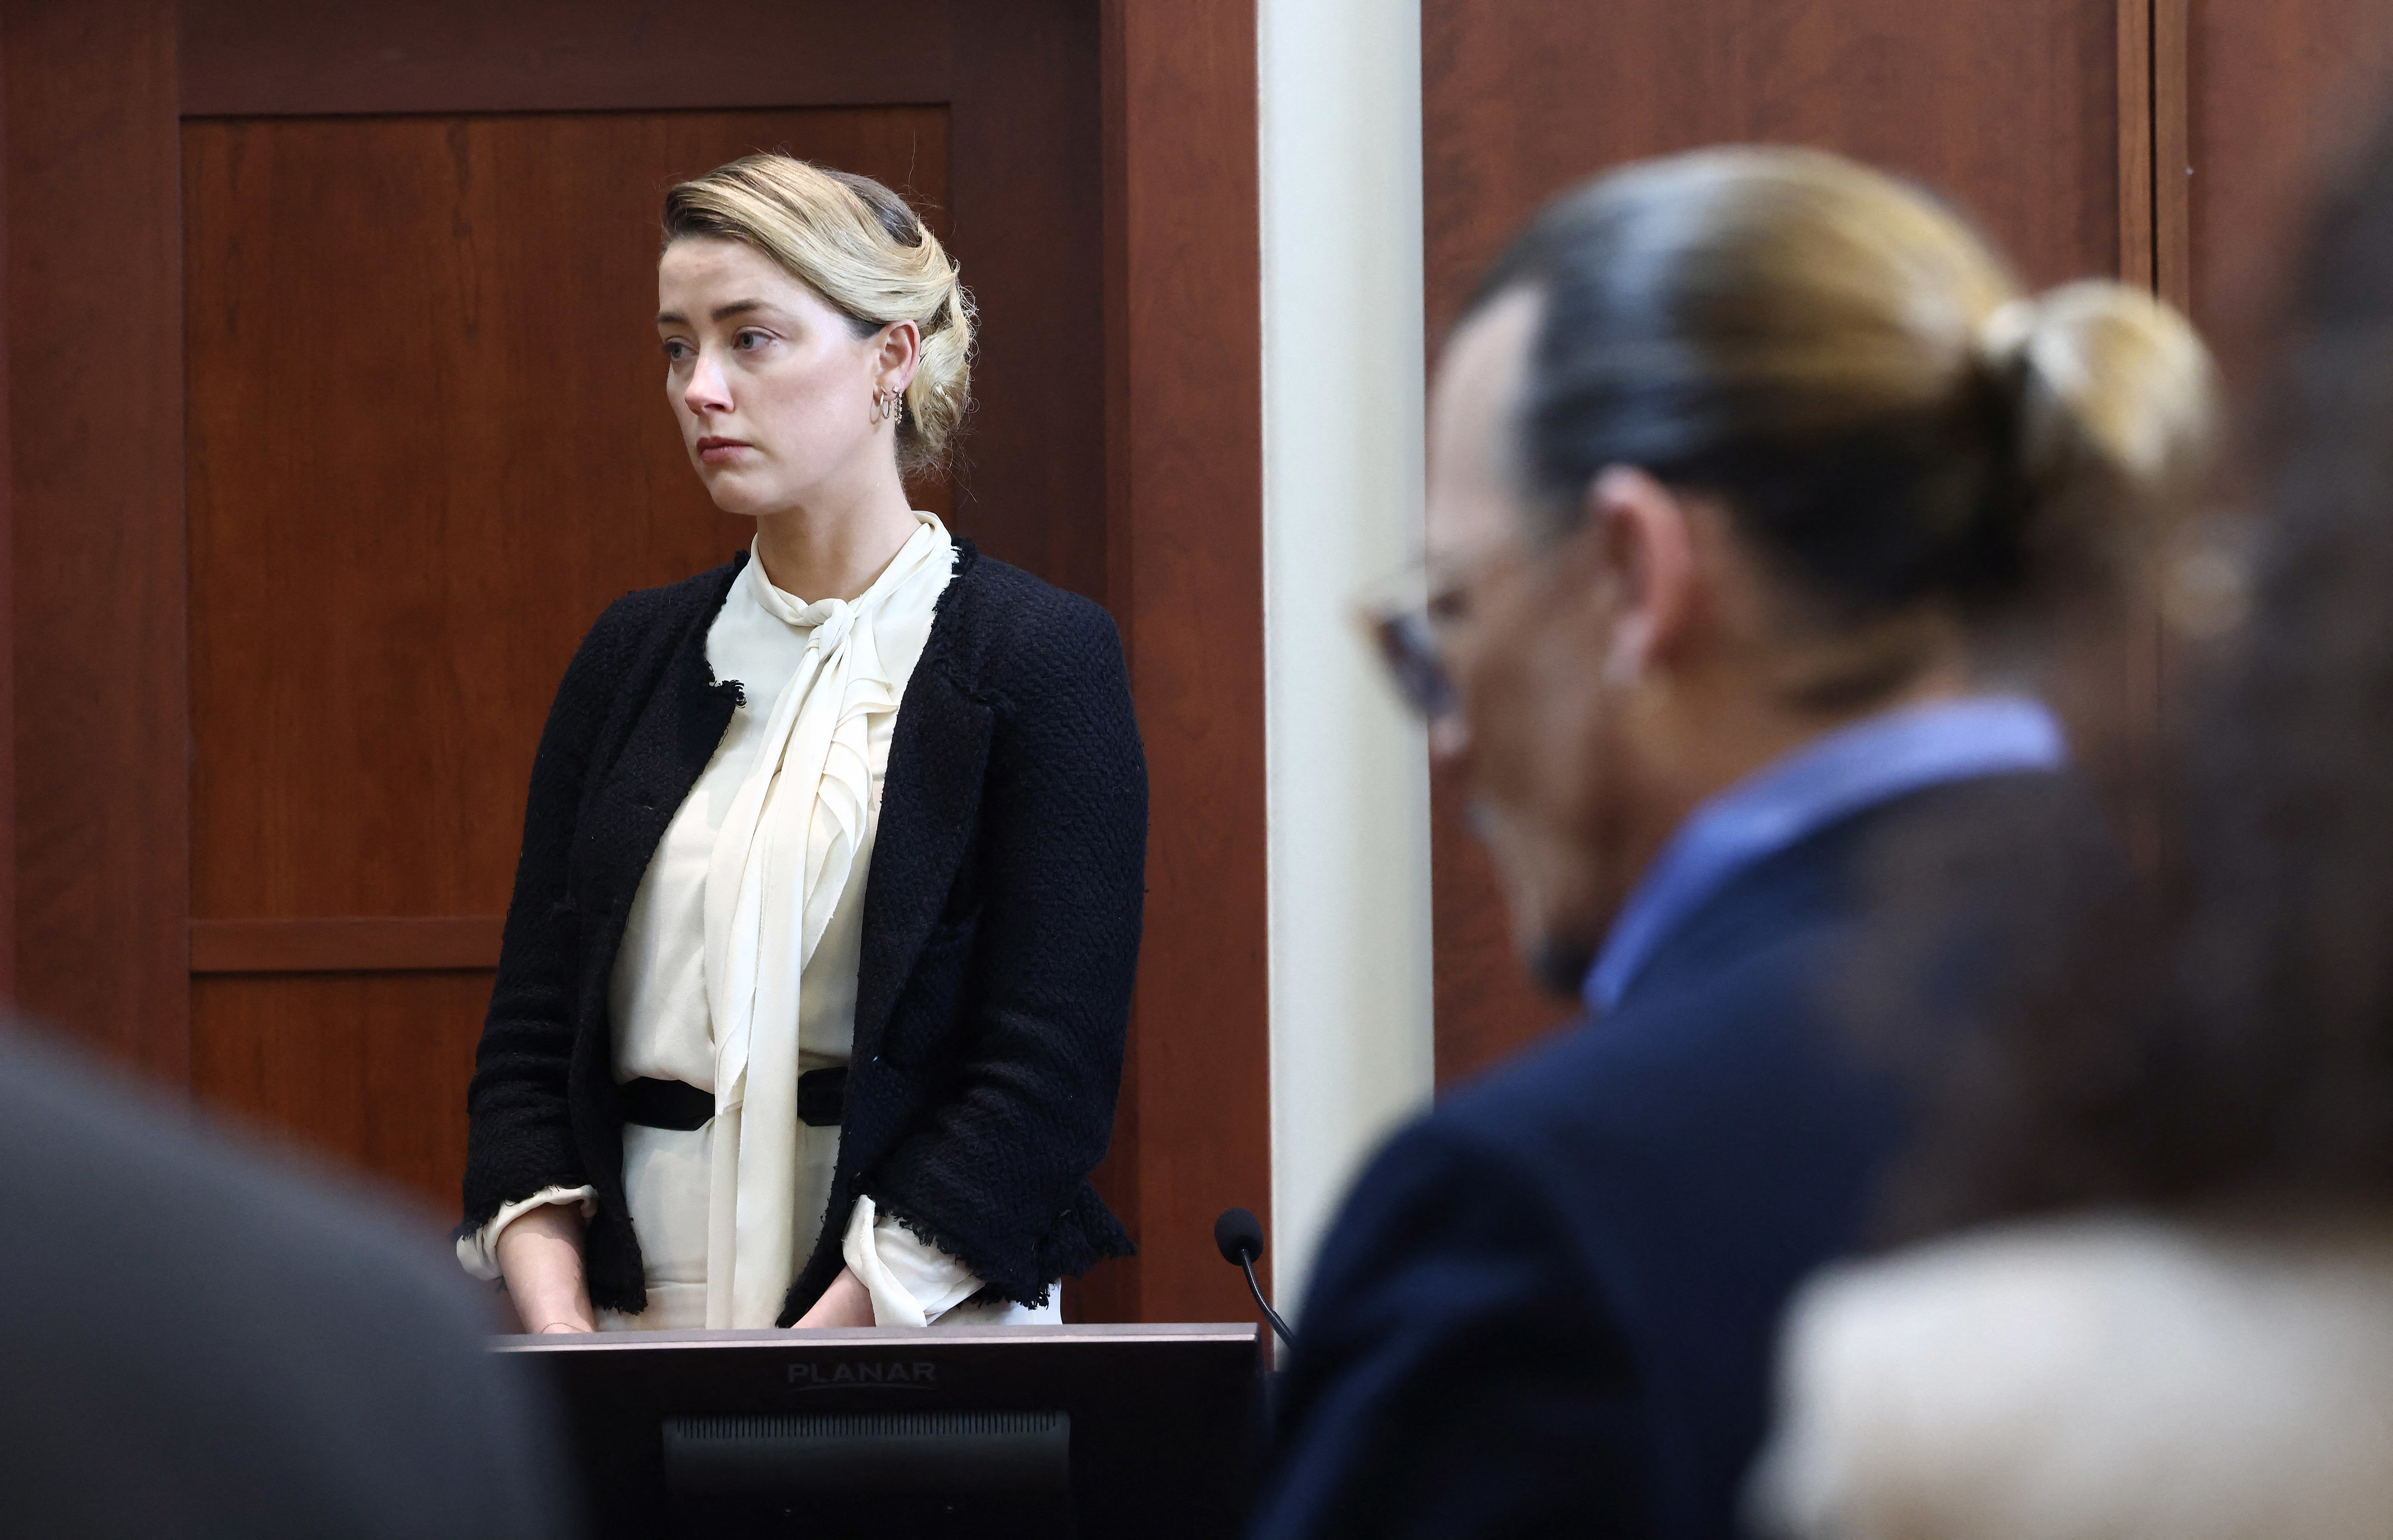 amber in the courtroom looking somber with Johnny Depp in the foreground